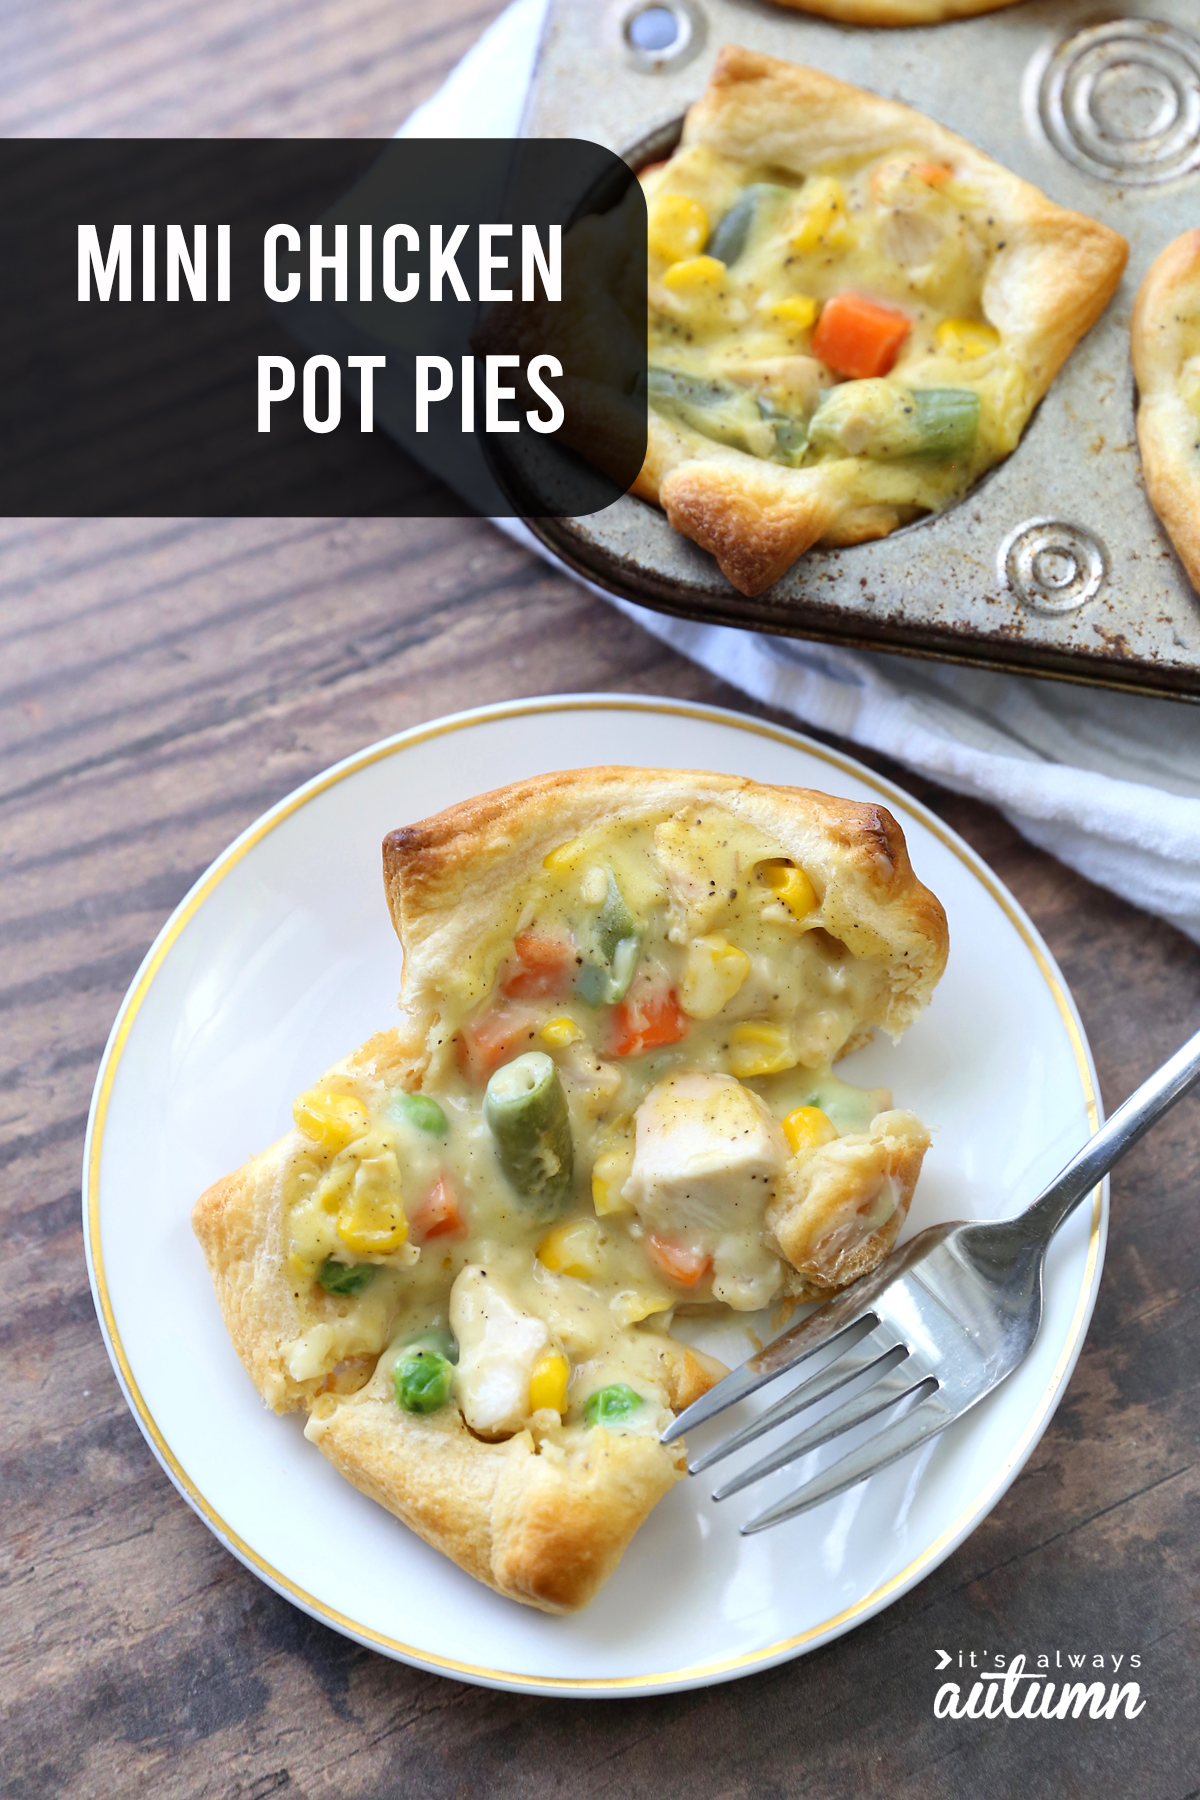 Mini chicken pot pies are super easy to make and taste really delicious! Simple comfort food at it's best. Easy kid friendly dinner idea.